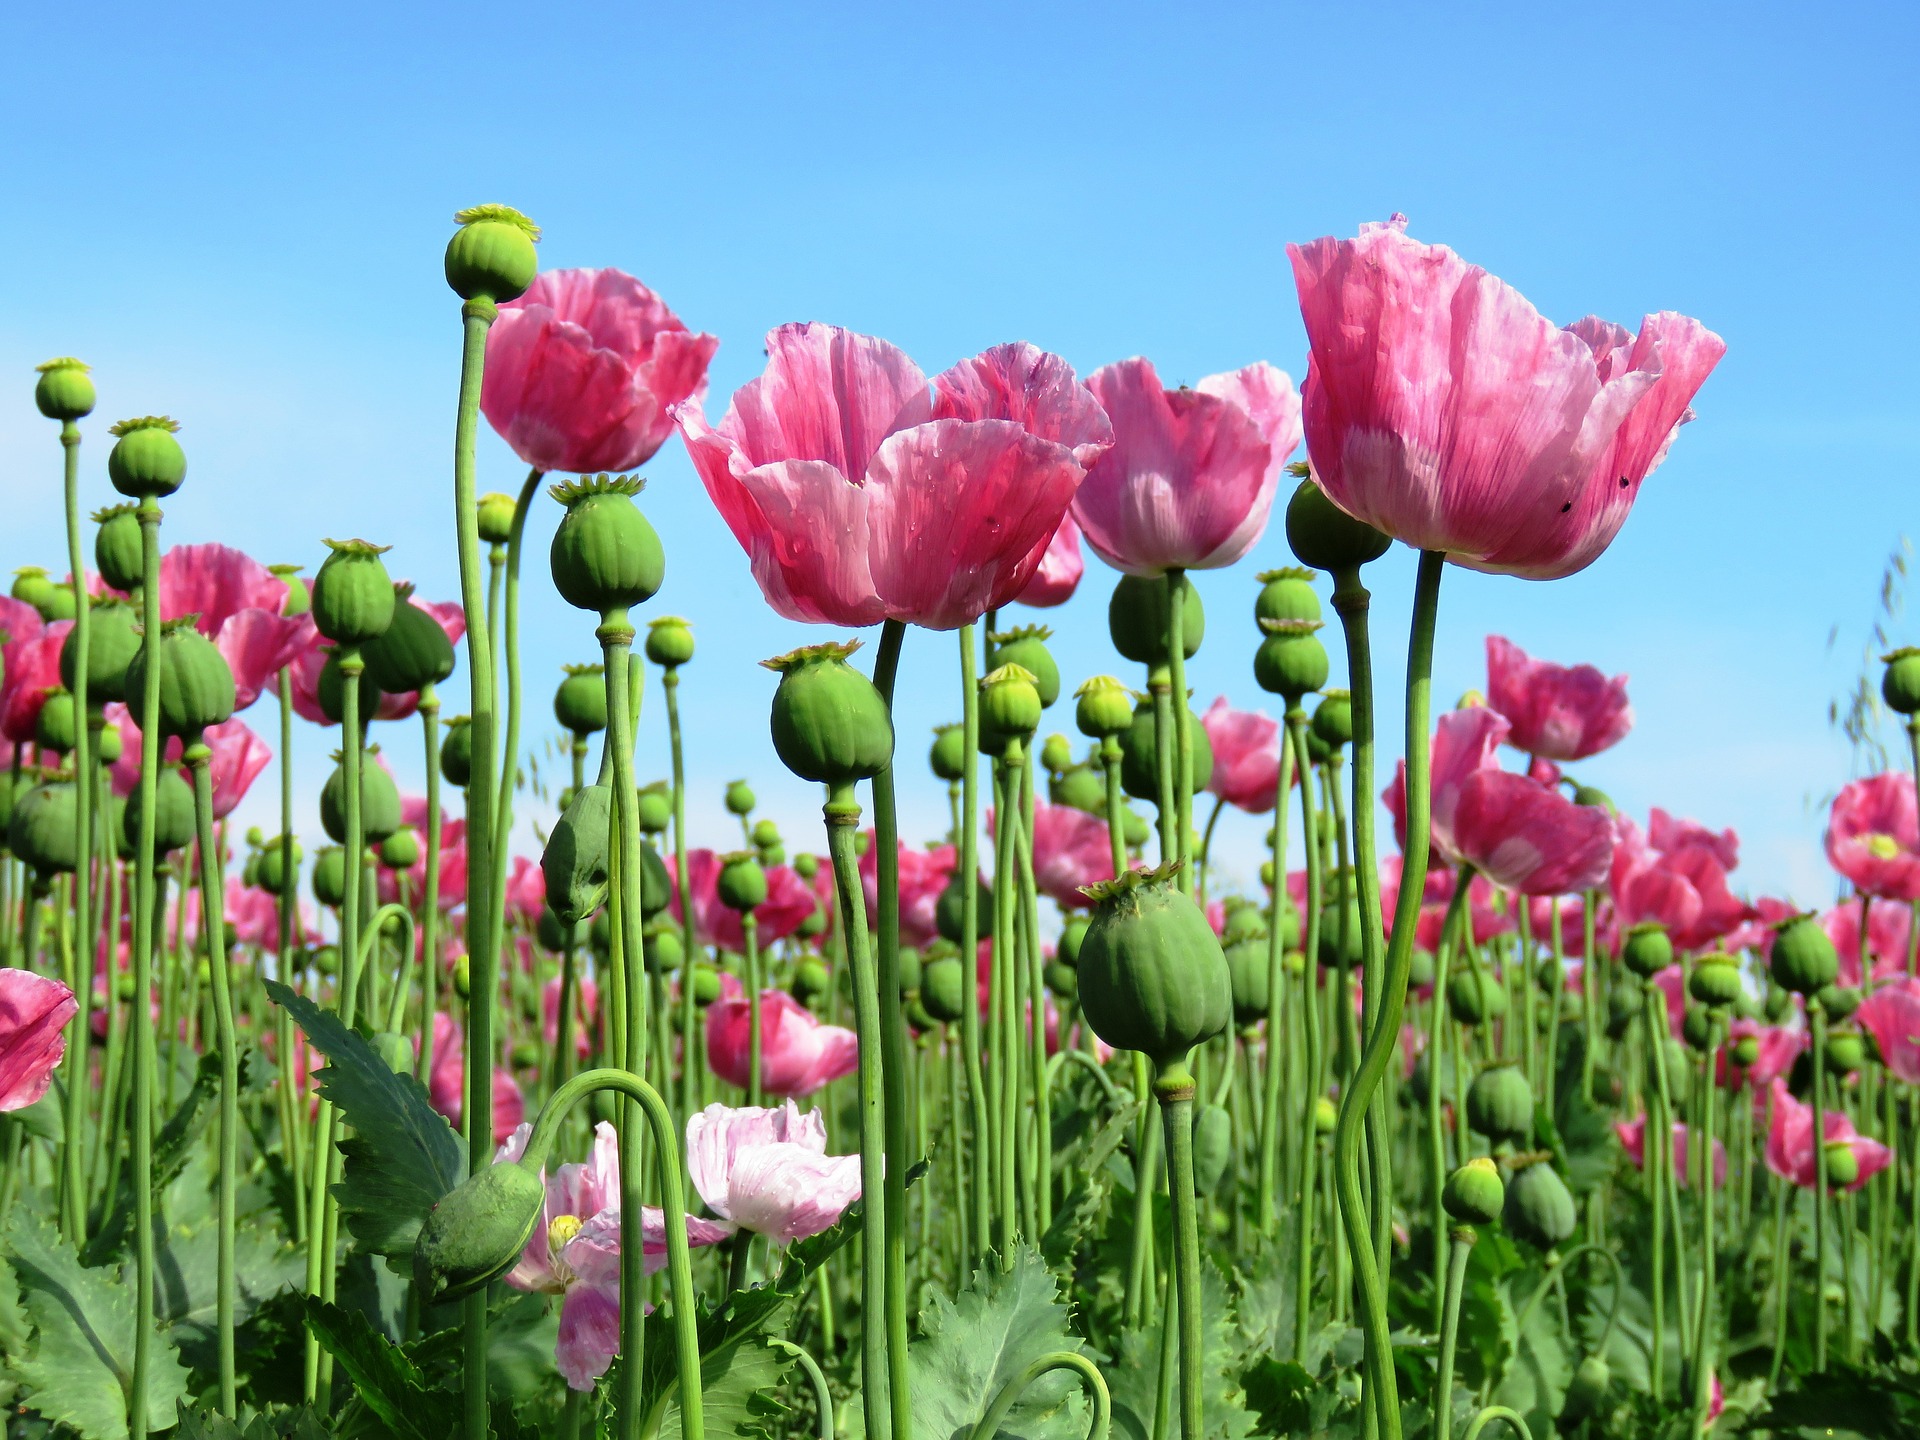 Legal opium production for medical use